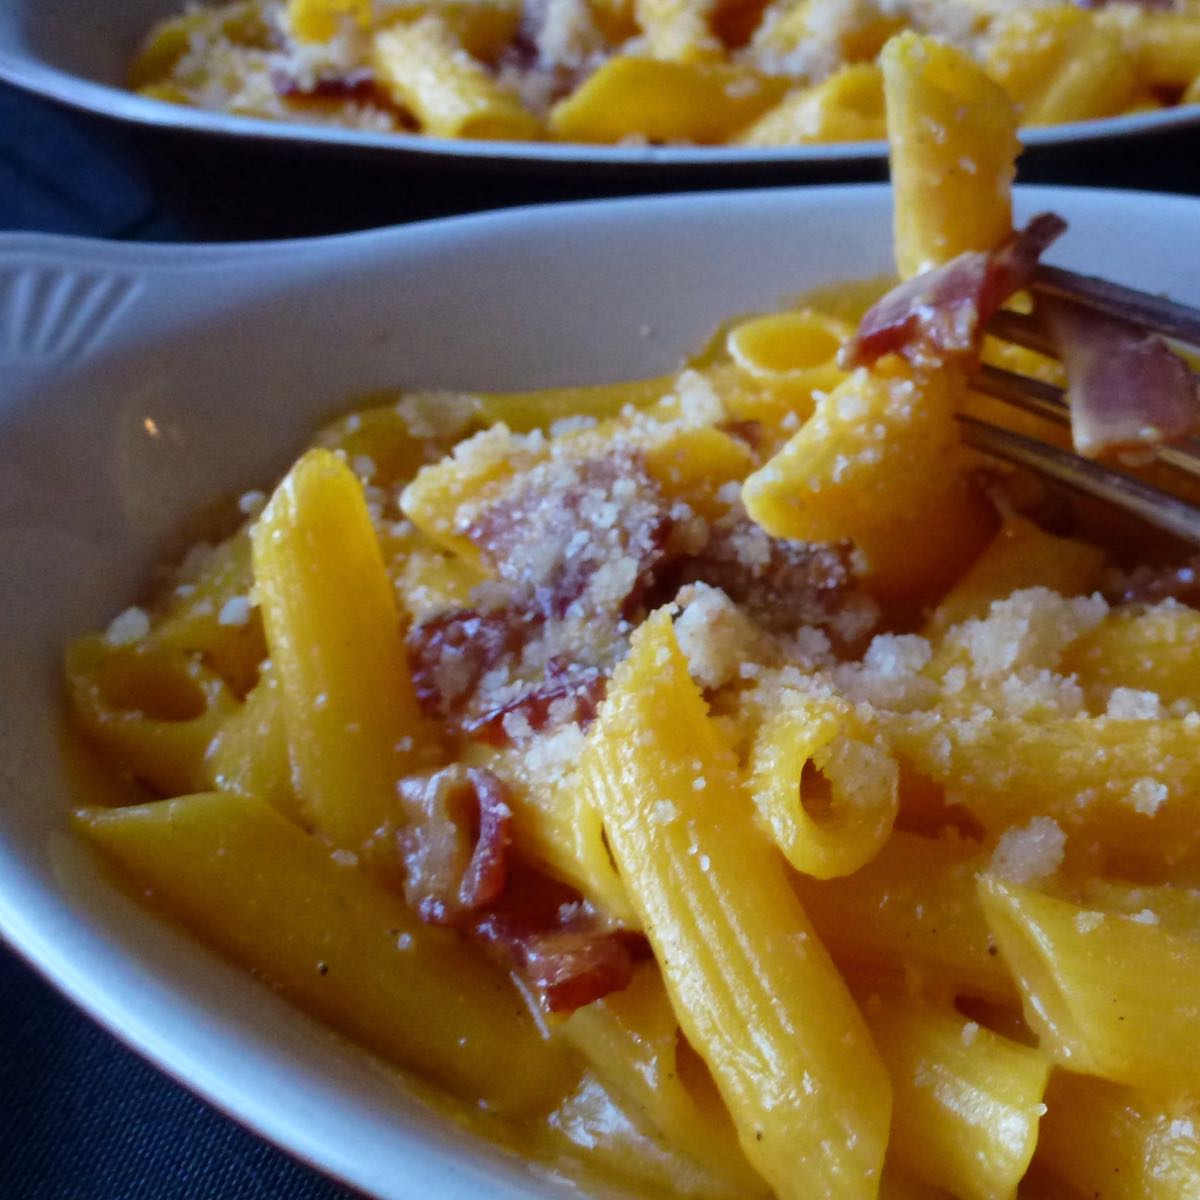 A fork grabbing some macaroni and cheese with bits of bacon from a dish.